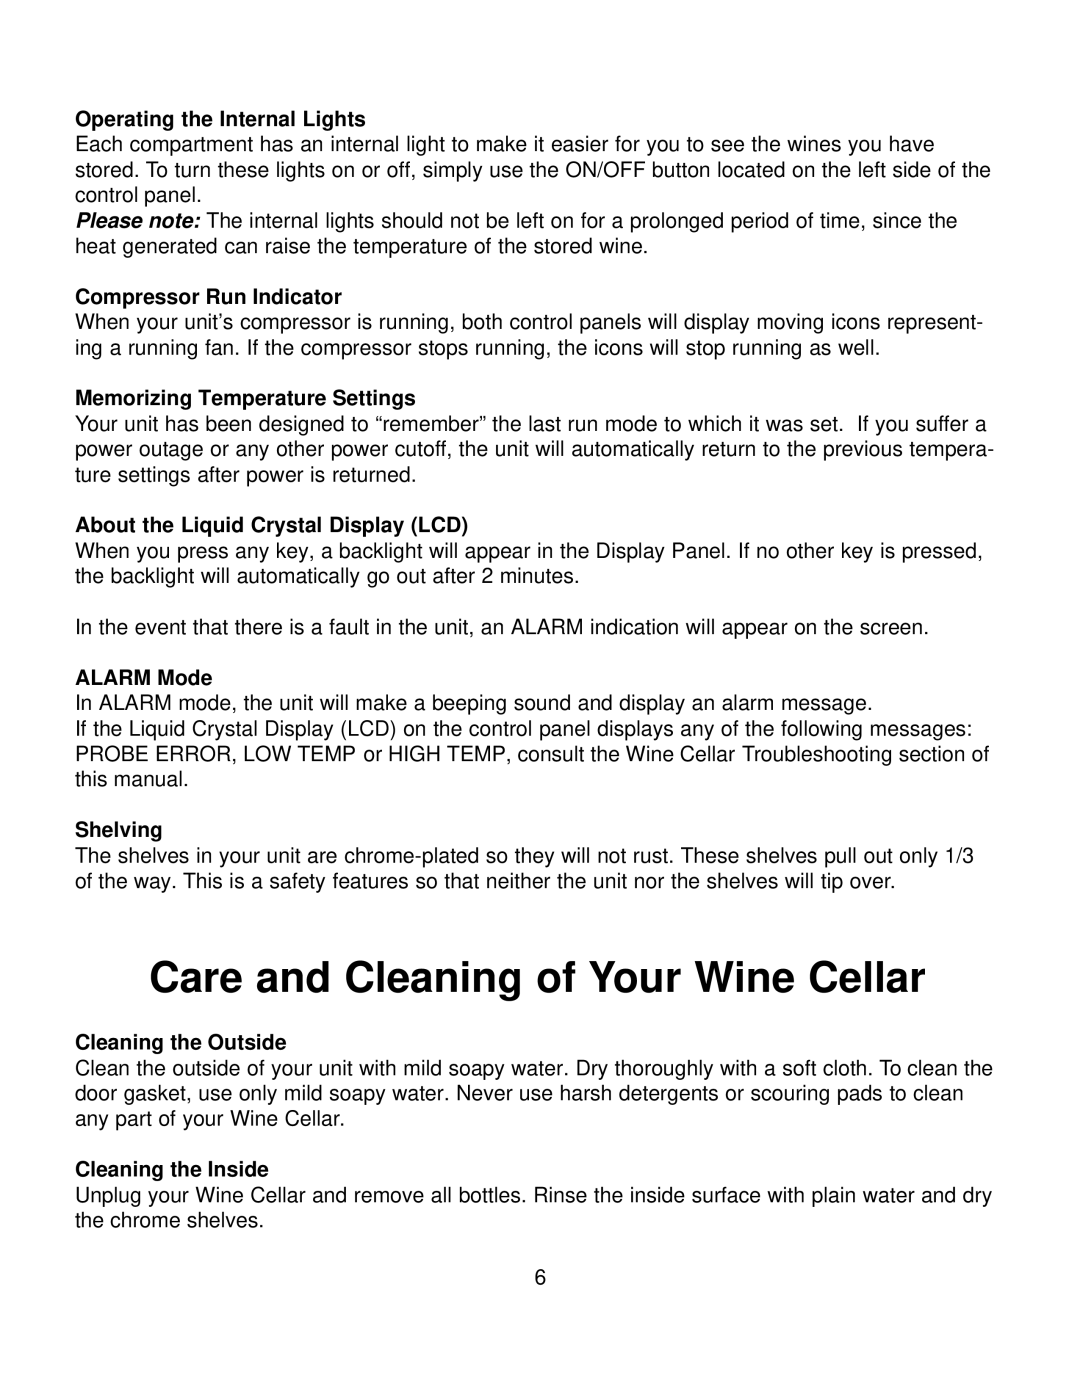 Franklin Industries, L.L.C FWC36 manual Care and Cleaning of Your Wine Cellar, Operating the Internal Lights, ALARM Mode 